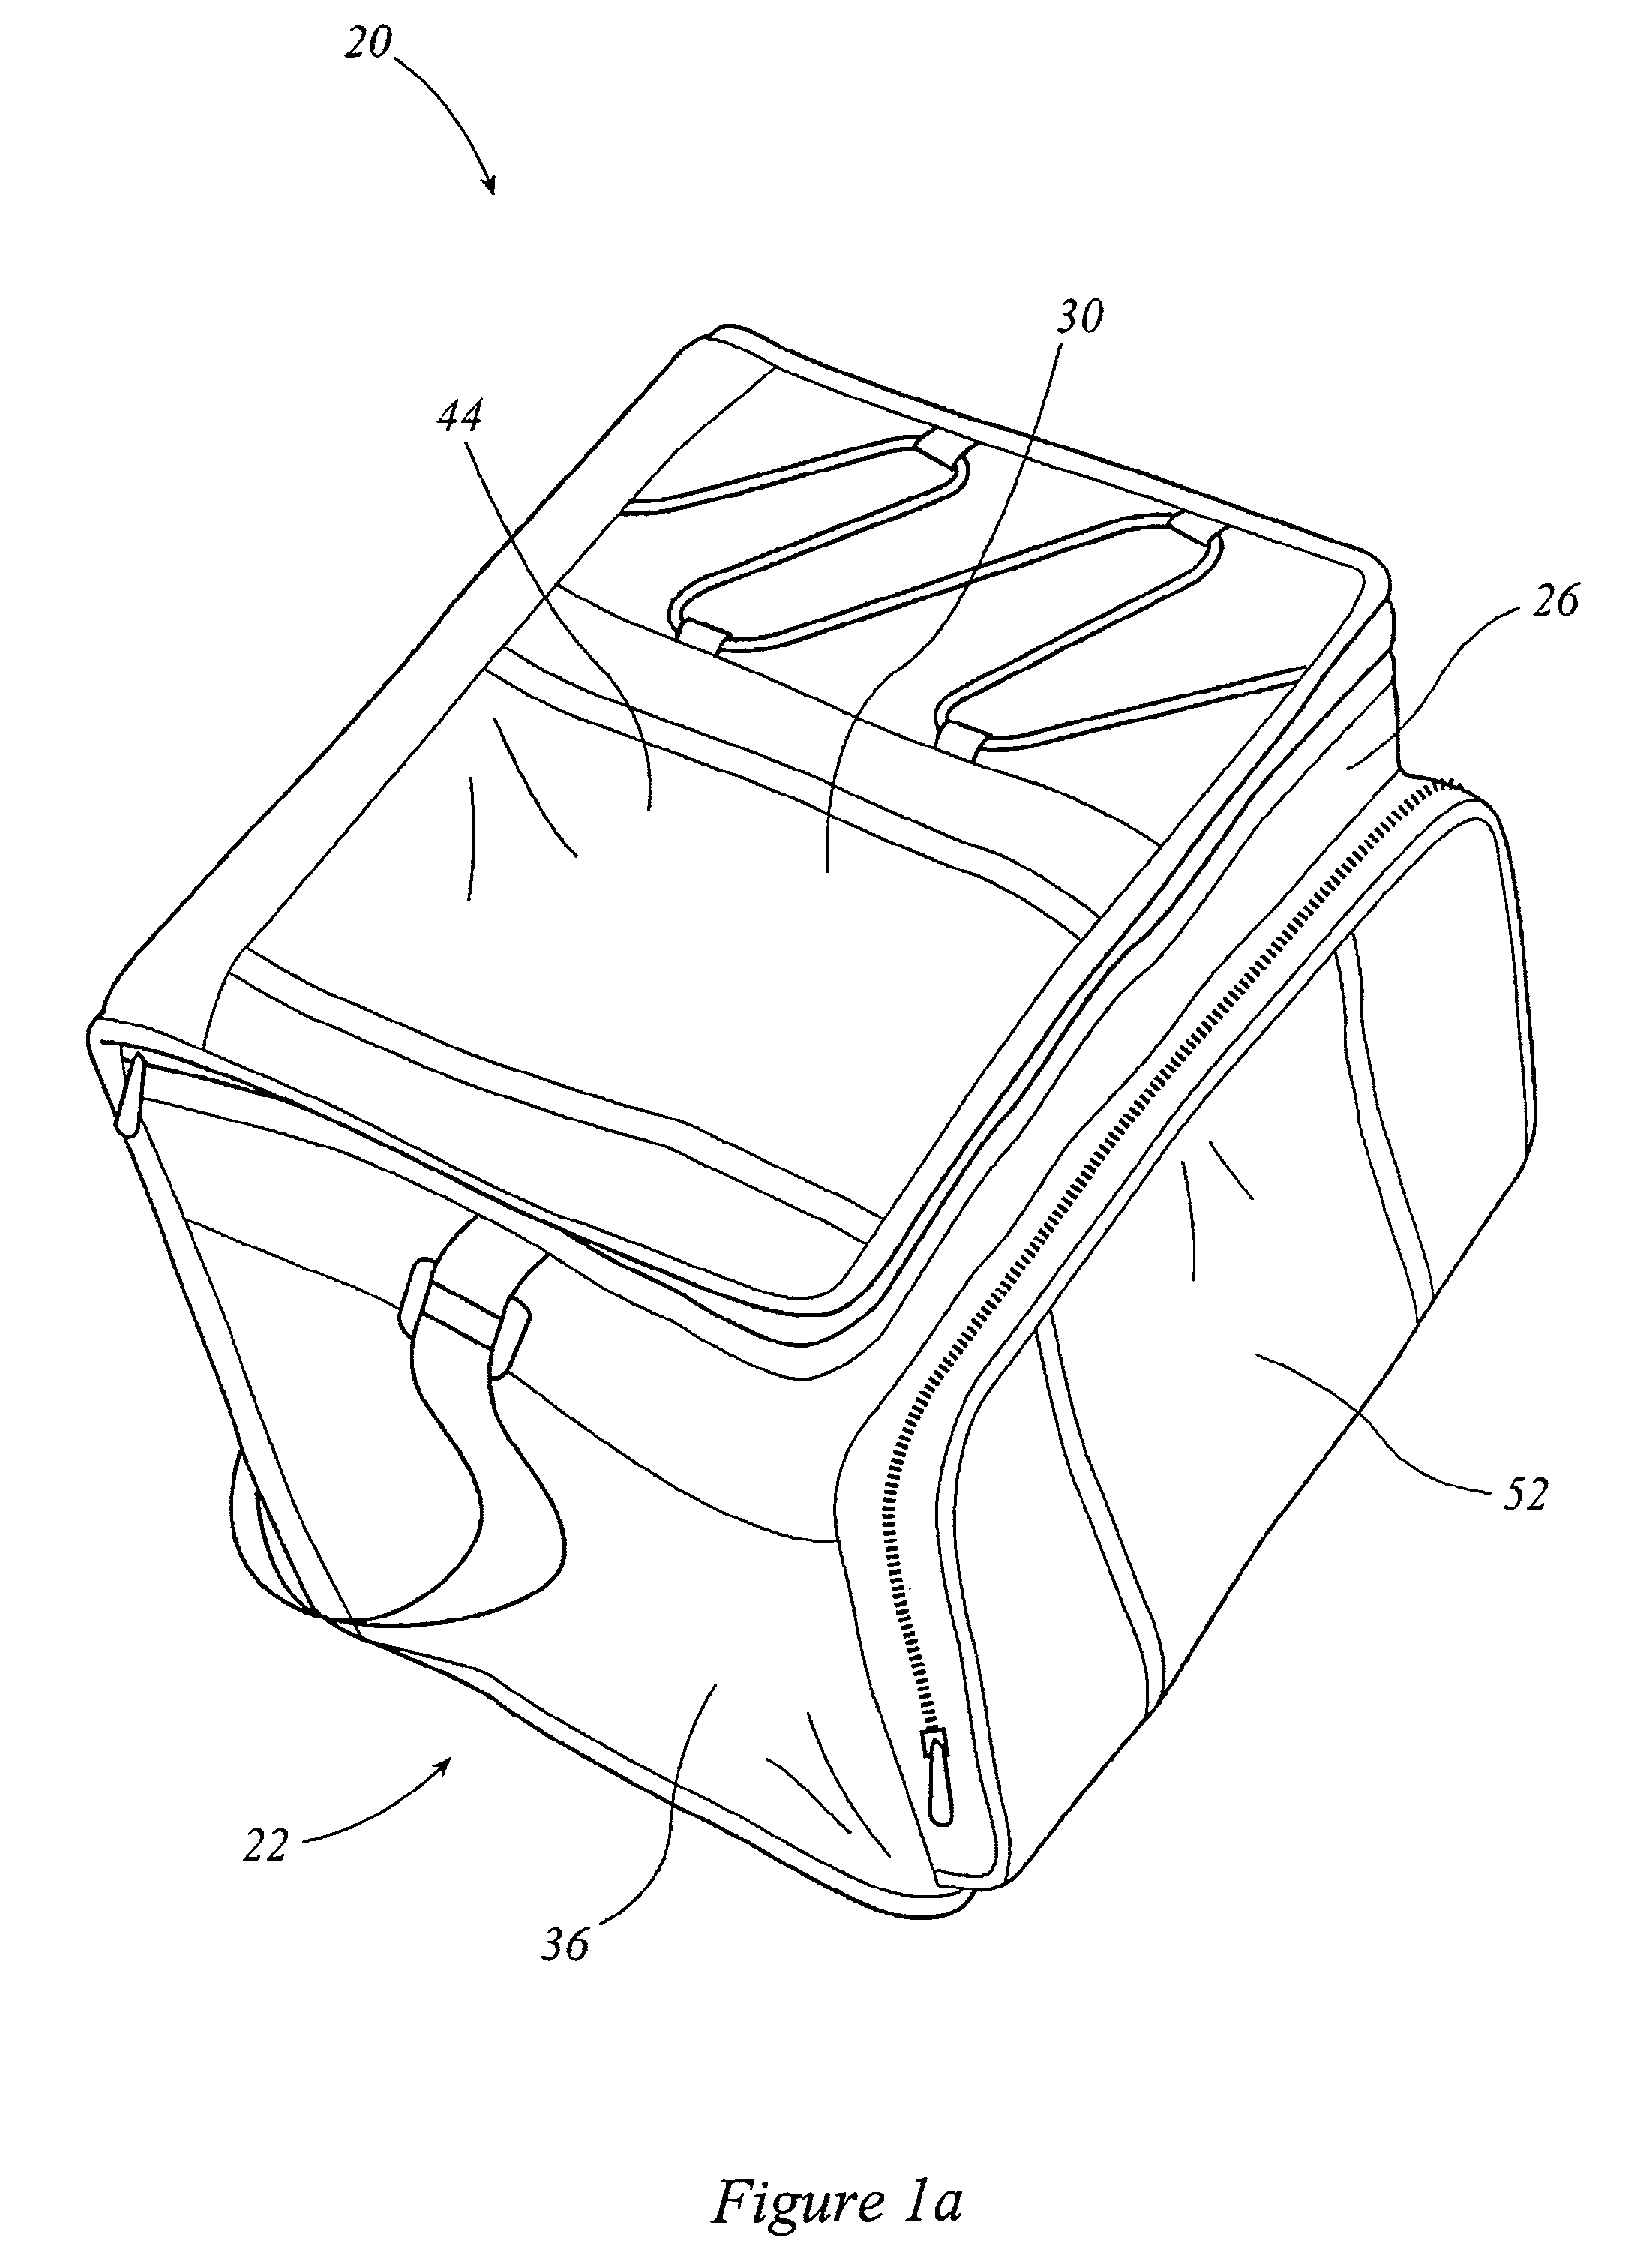 Soft-sided insulated container with thermal storage member